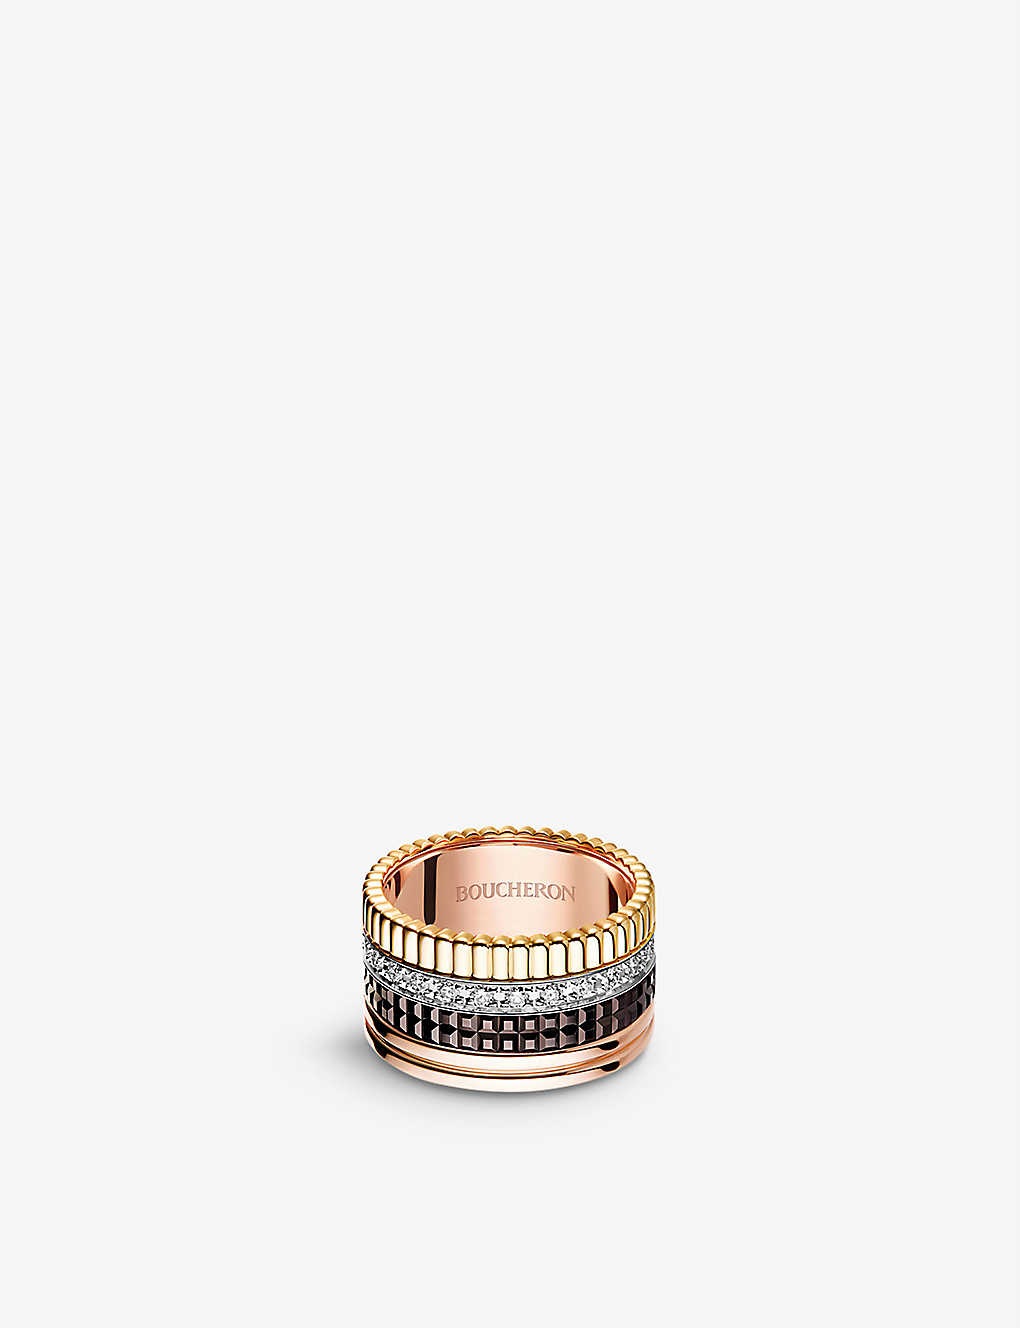 Boucheron Quatre Classique Ring In Tricolor Gold With Brown Pvd And Diamonds In Gold/white/pink Gold